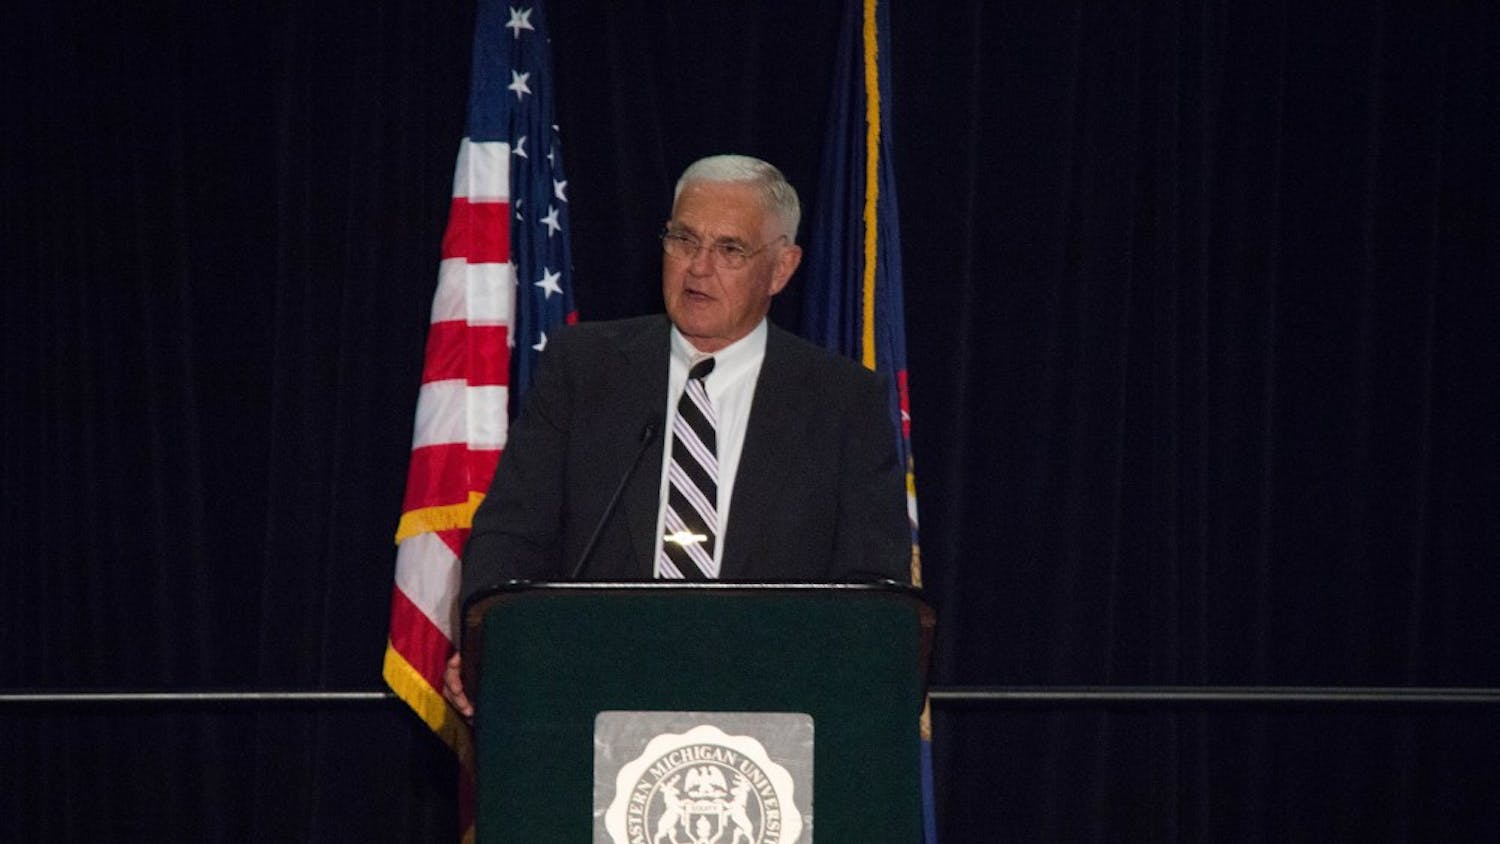 	Bob Lutz visited EMU on June 4 to talk about leadership.